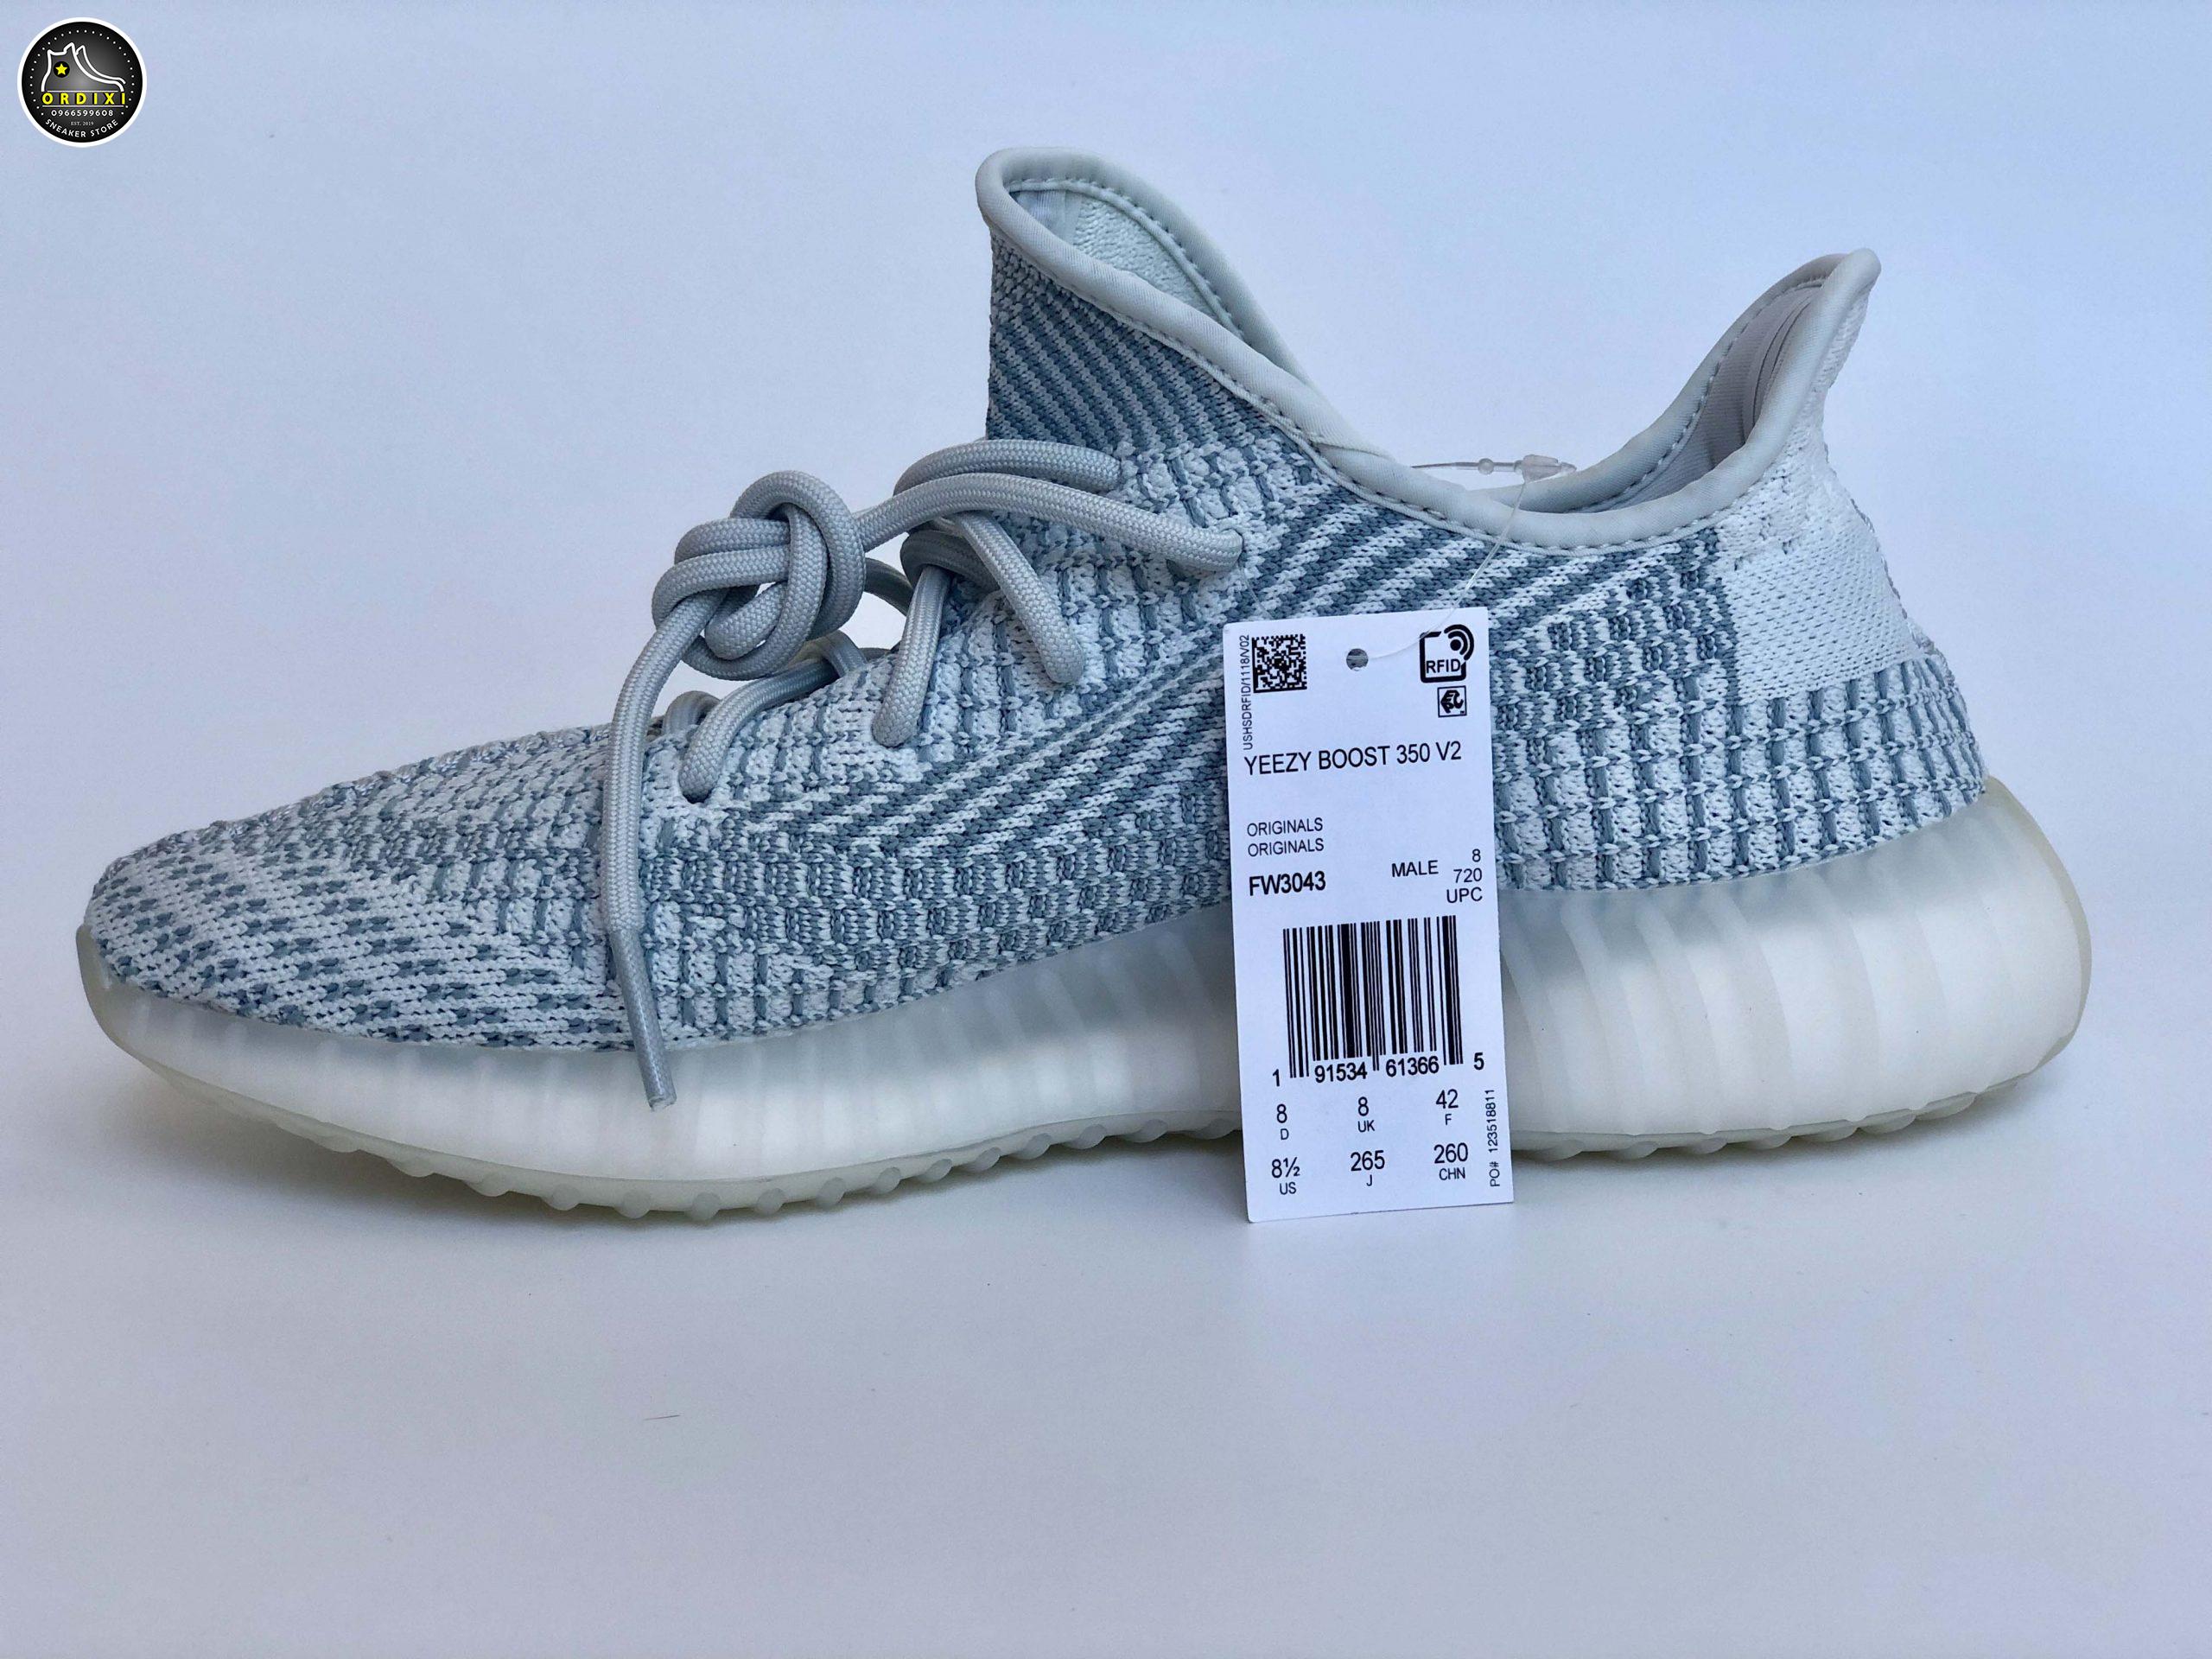 Adidas Yeezy Boost 350 V2 Cloud White (Non-Reflective) Shoes ...